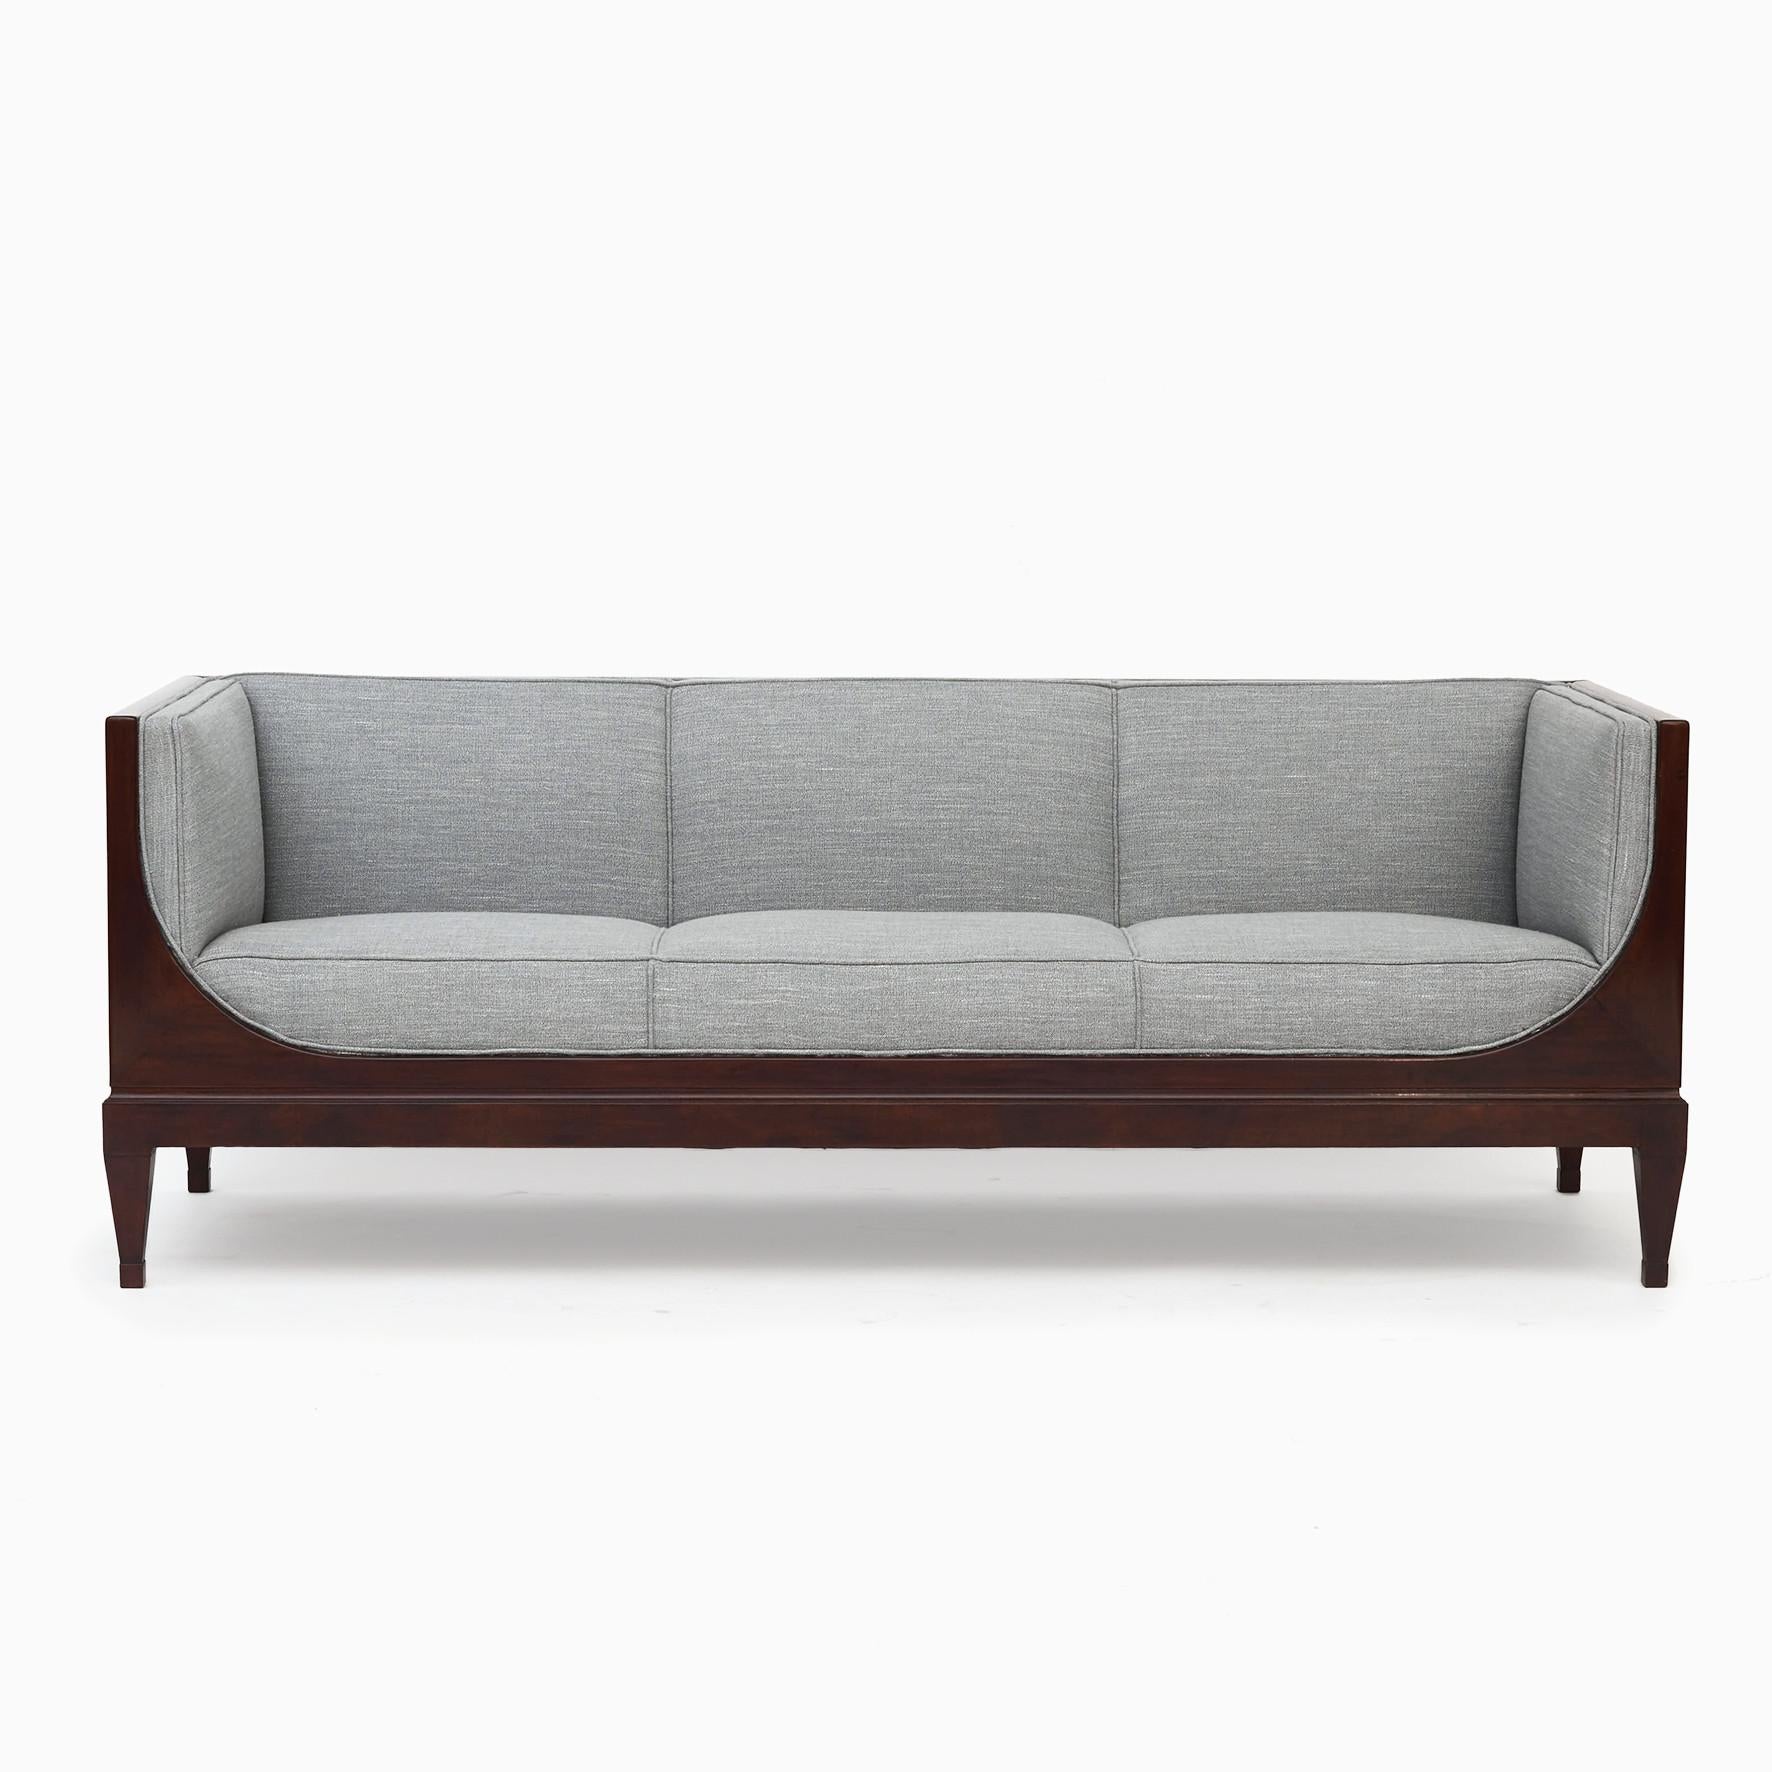 Frits Henningsen sofa from 1889-1965.
Mahogany sofa made in high quality at own carpentry in 1940-1950.
Mahogany refinished with a light French polish.
Seat height 45 cm.
Newly upholstered in wool-linen blend from Larsen.

Literature: Bodil Busk